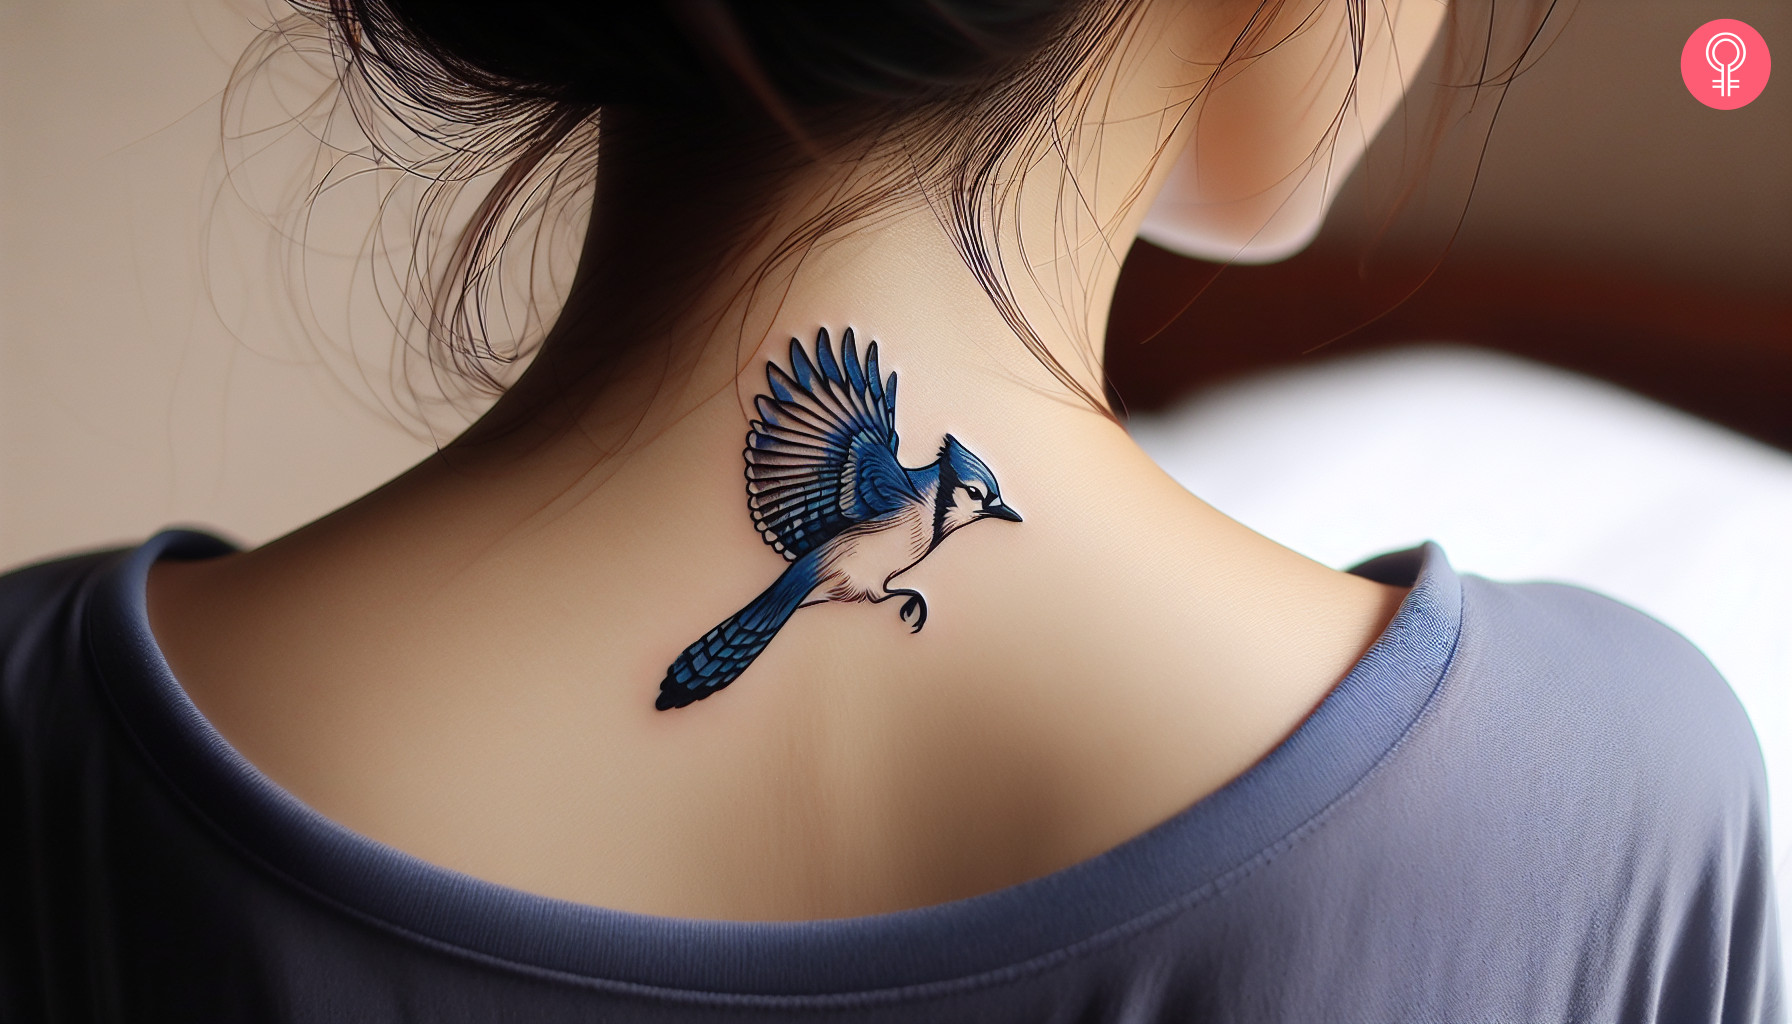 A close up of a flying blue jay tattoo on a woman’s upper arm